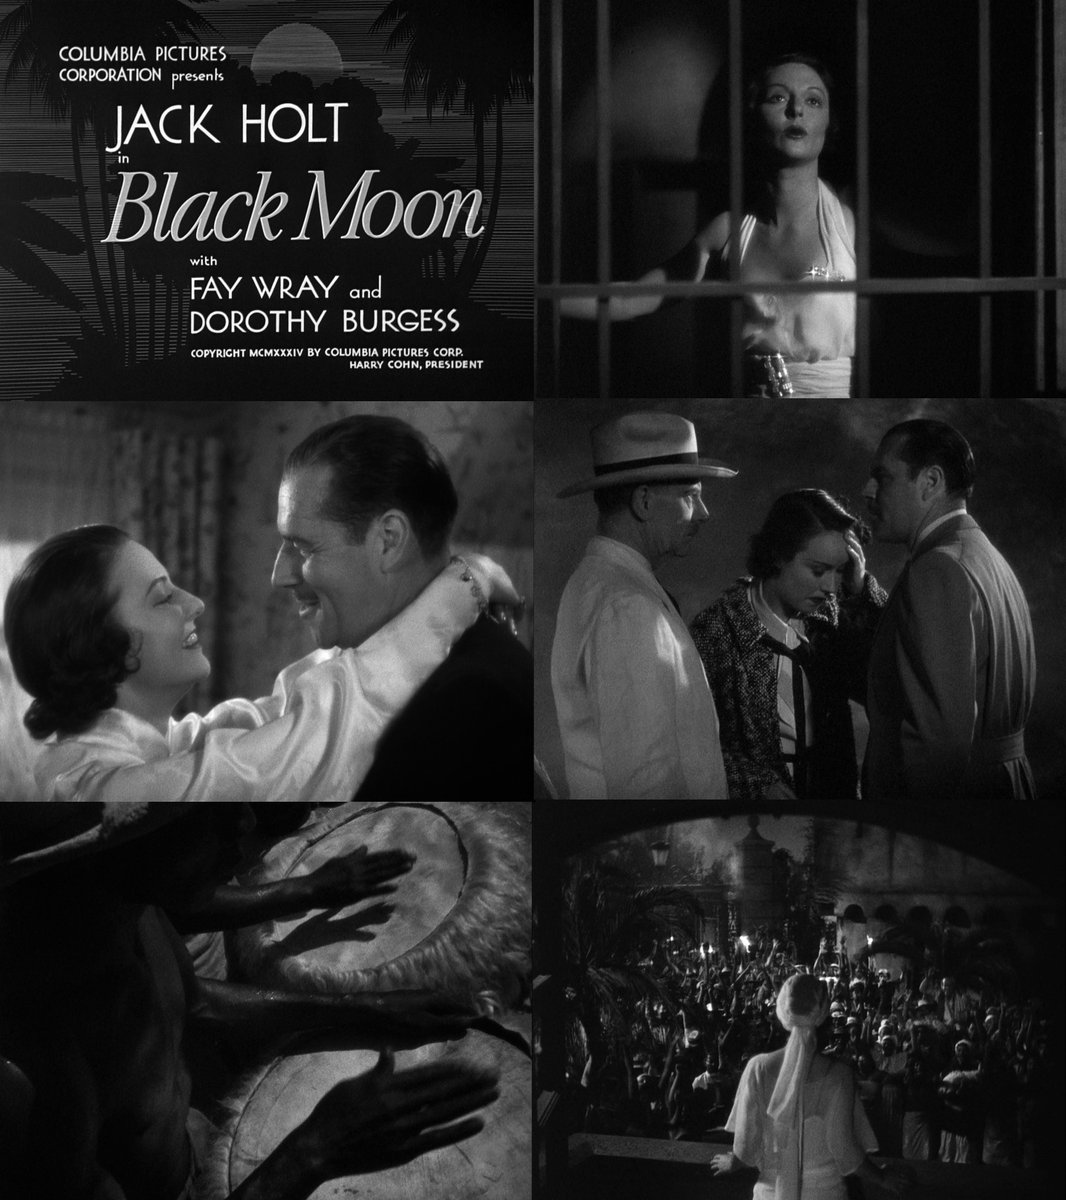 We're bringing forgotten 30's voodoo horror BLACK MOON to Blu-ray for the first time worldwide this month! 🌑🔥

Fay Wray, Jack Holt, and Dorothy Burgess star in this thrilling piece of cinema, ripe for rediscovery in both the Original Black & White + Tinted versions of the film.